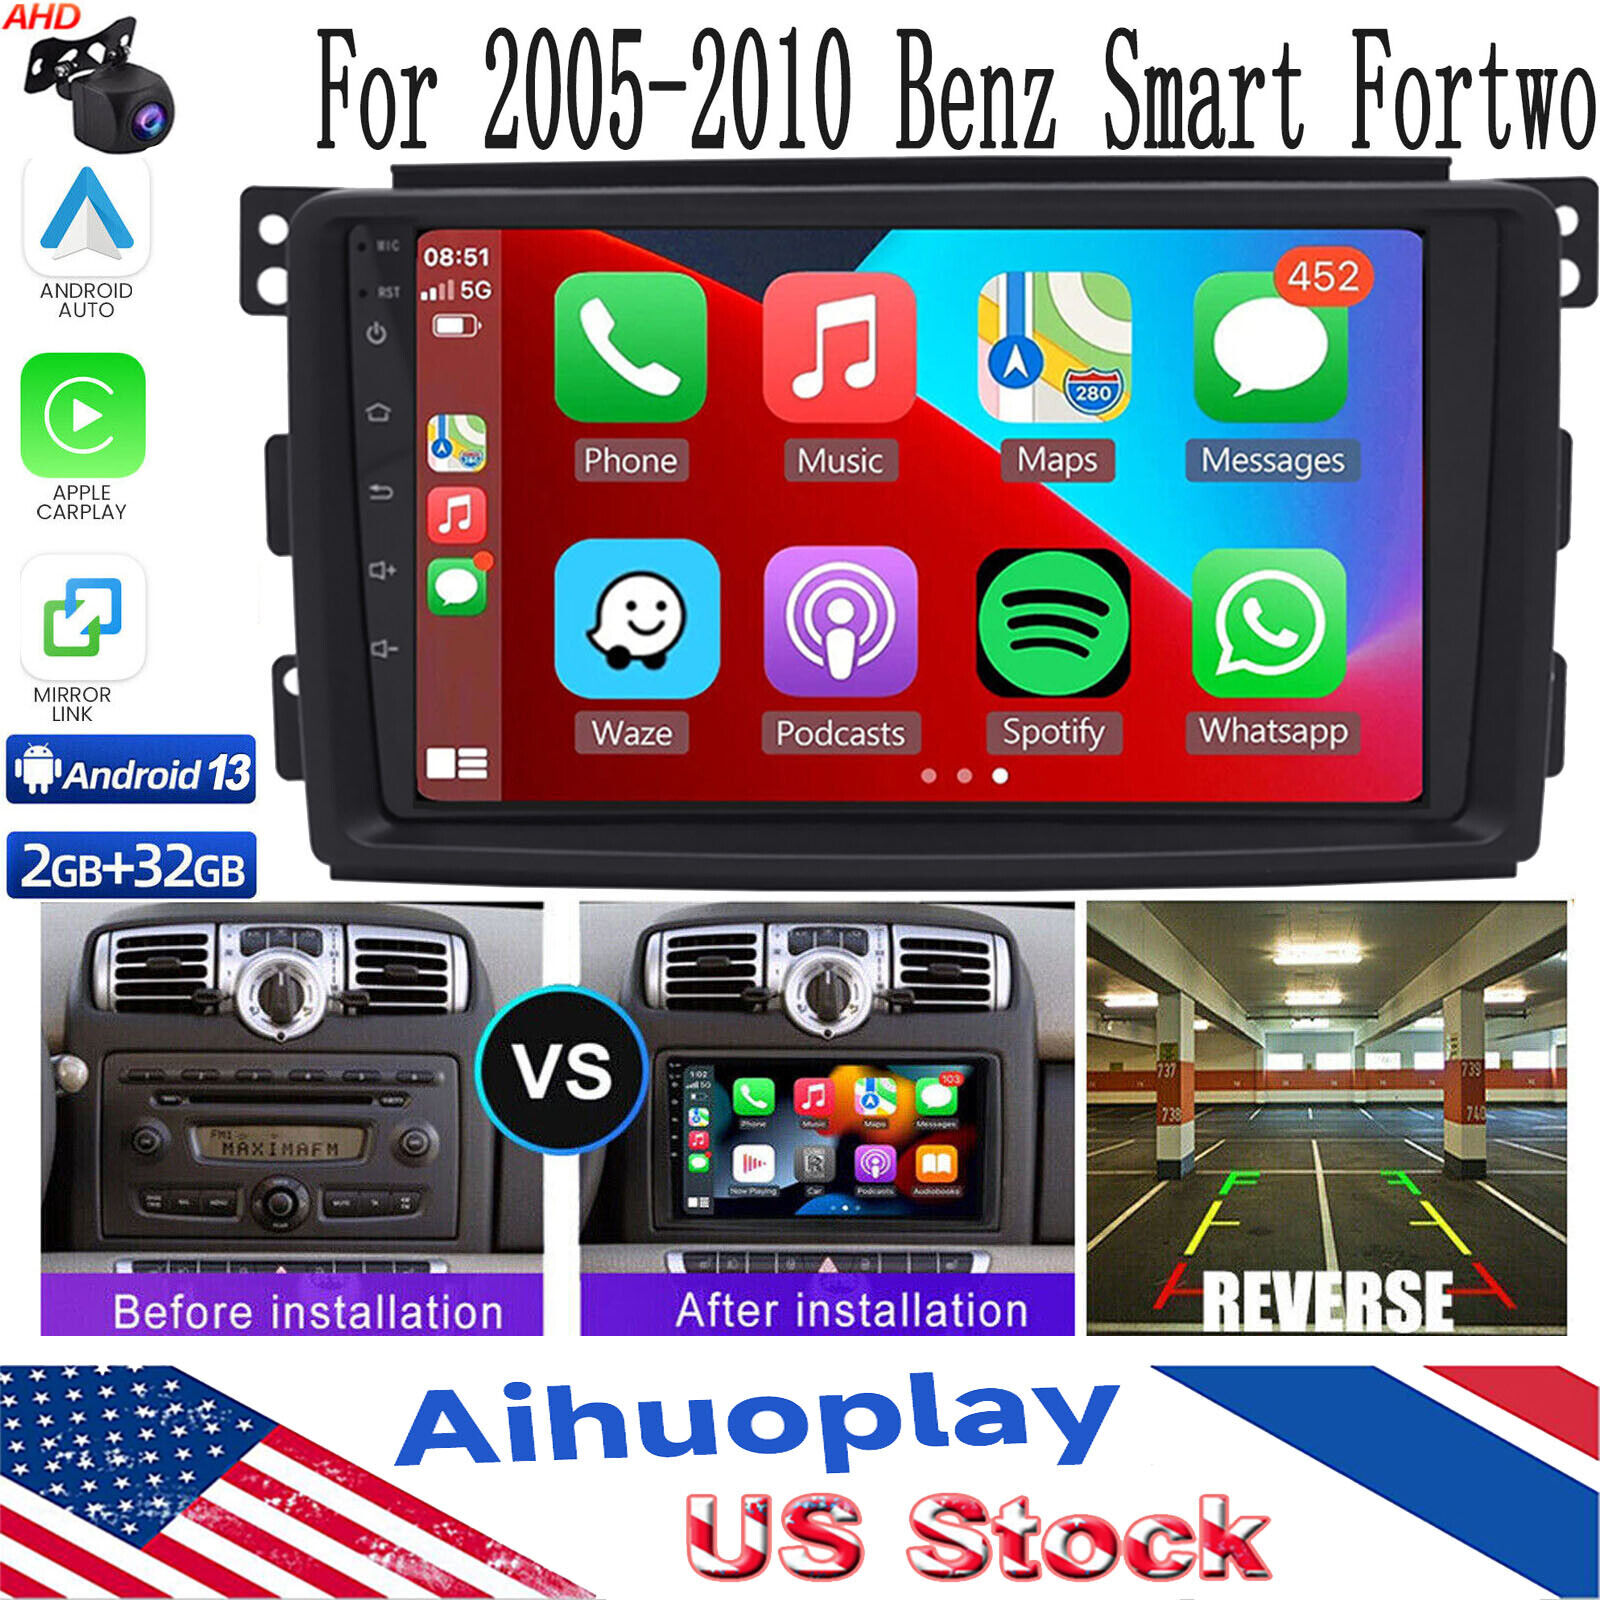 Android 13 Car Radio For 2005-2010 Benz Smart Fortwo GPS Navi RDS Stereo Carplay